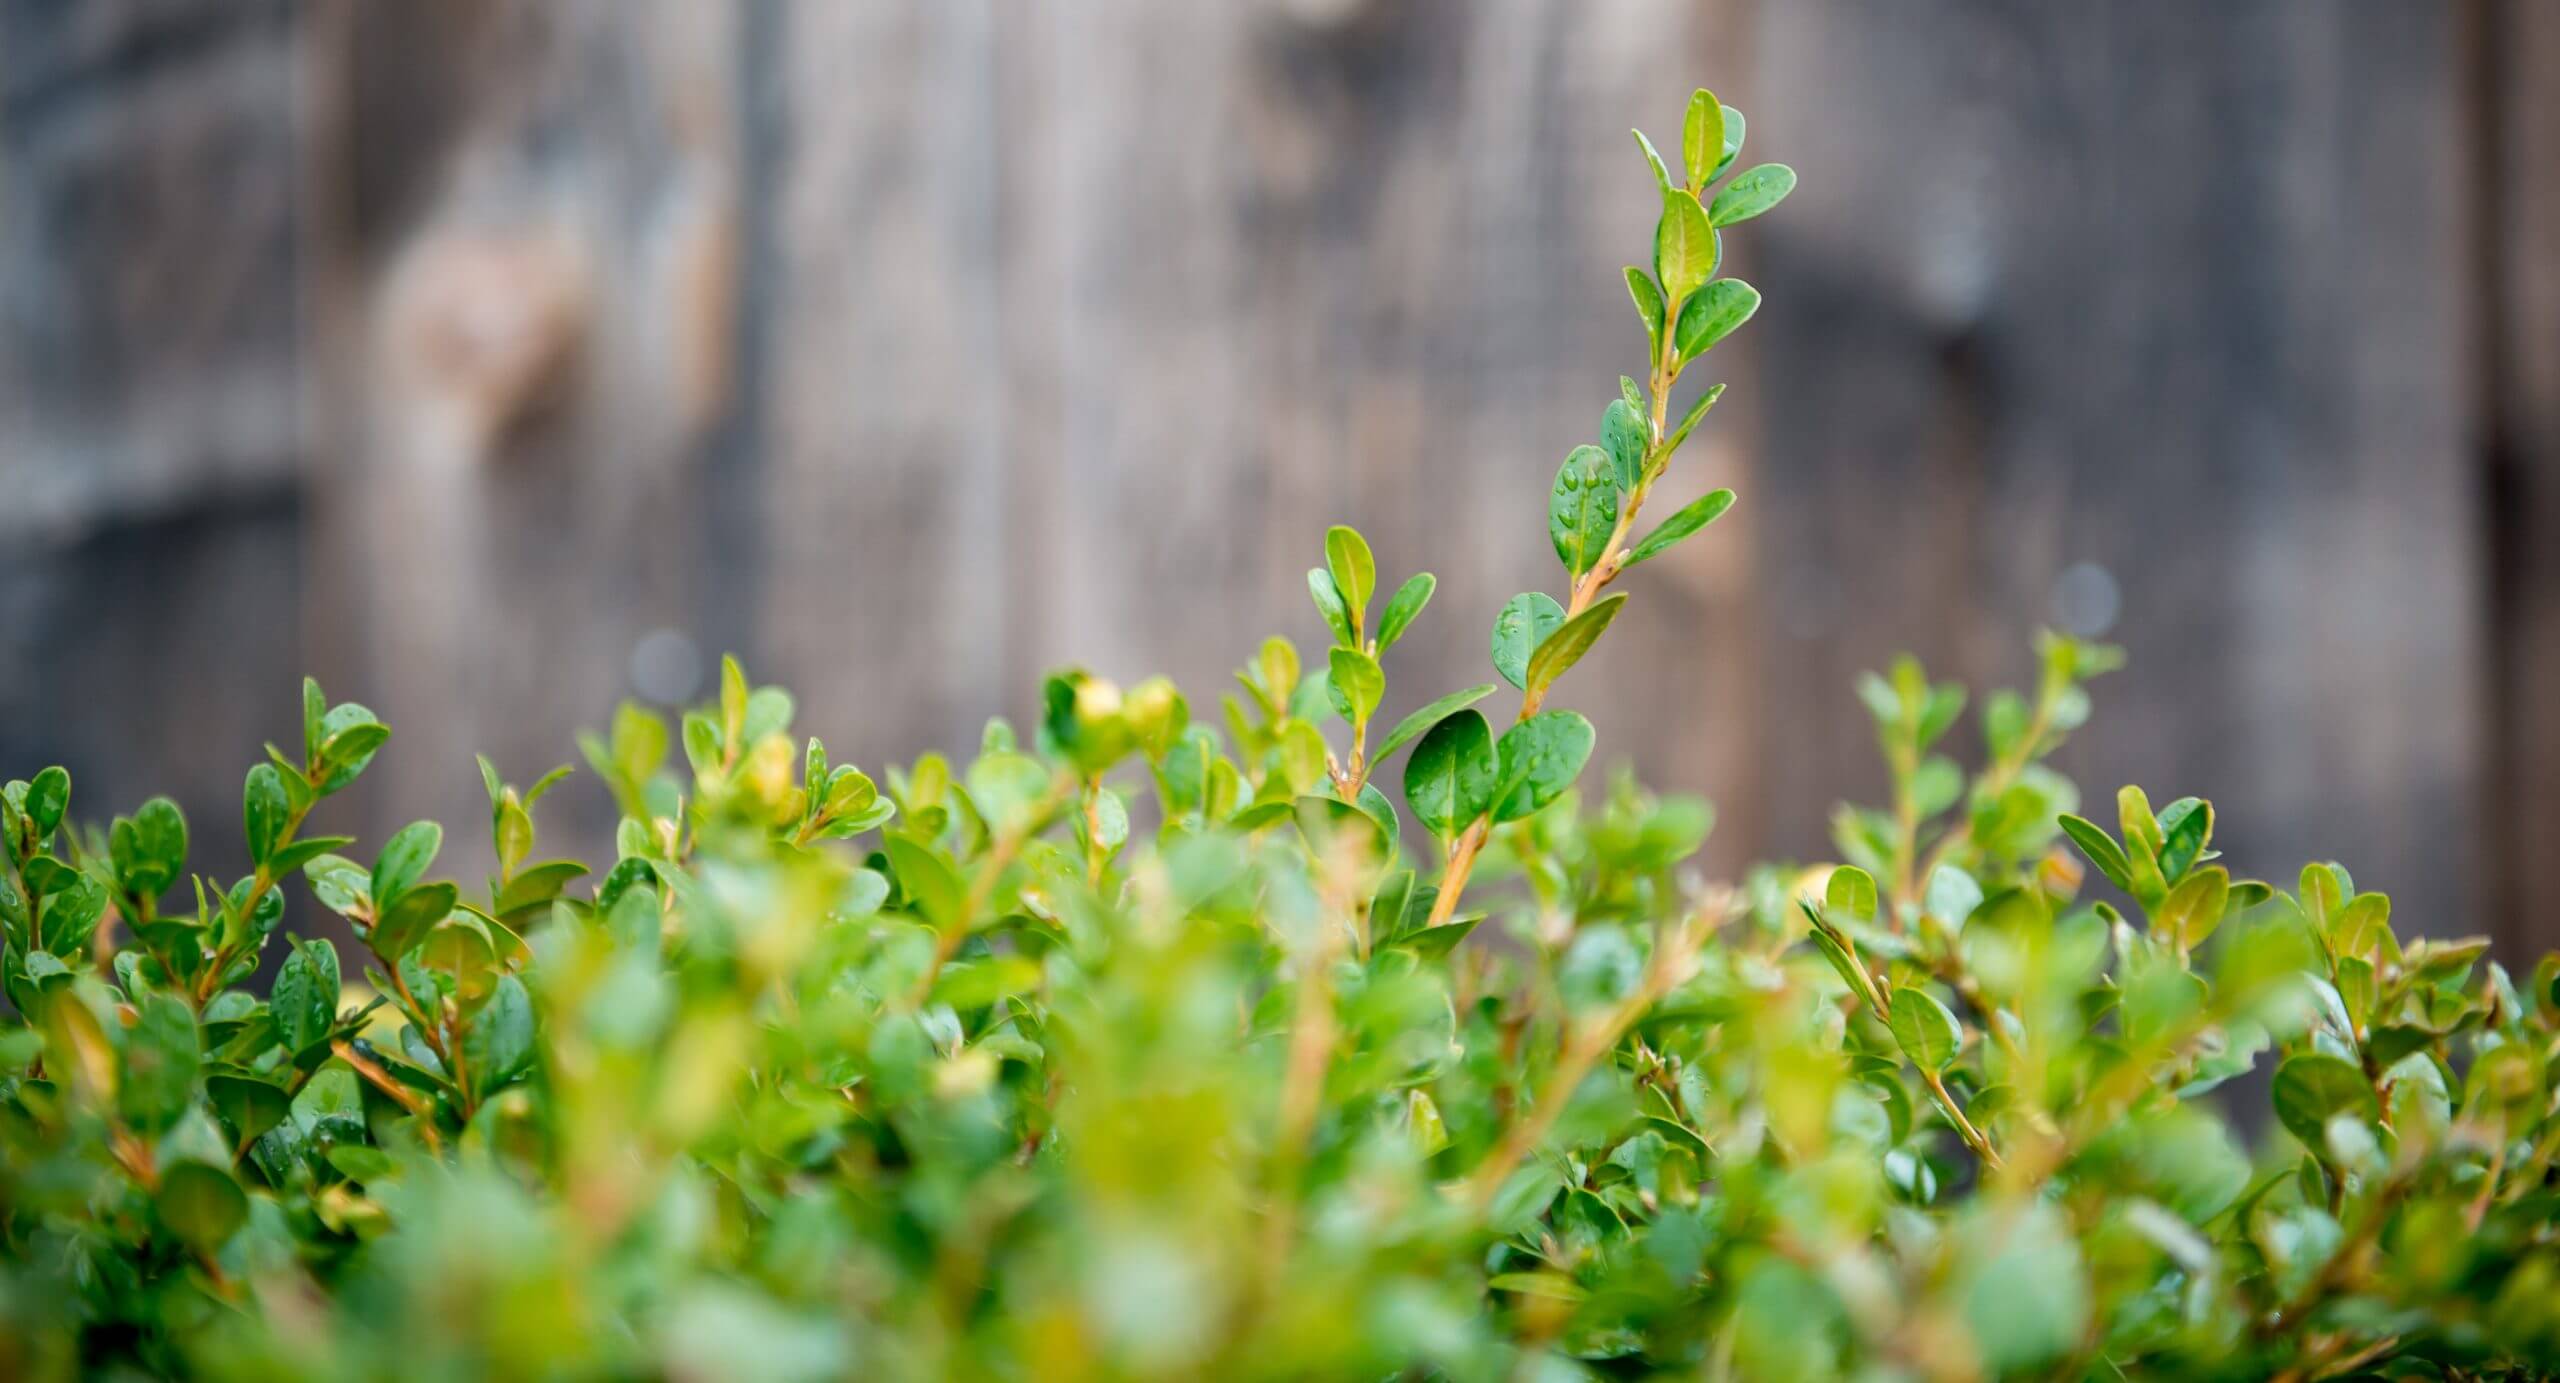 Healthy leaves grow from the branches of a bush.